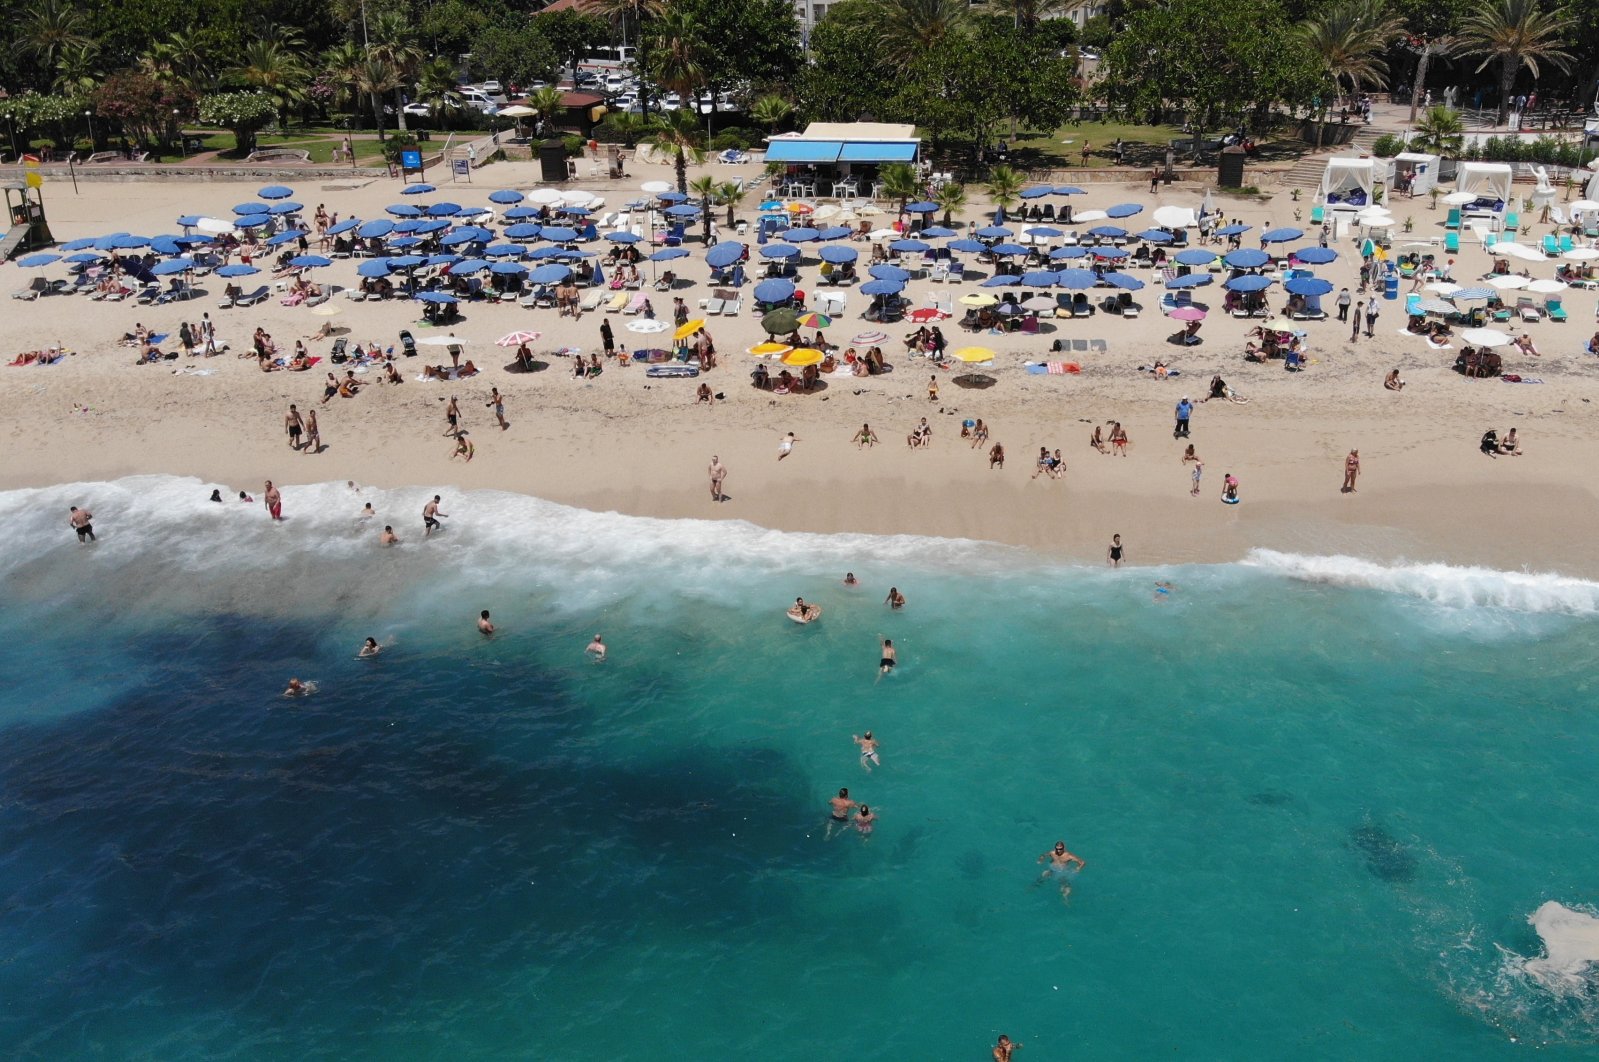 Vacationers enjoy the sea at a beach in Antalya, southern Turkey in this photo republished on July 14, 2022. (IHA Photo)